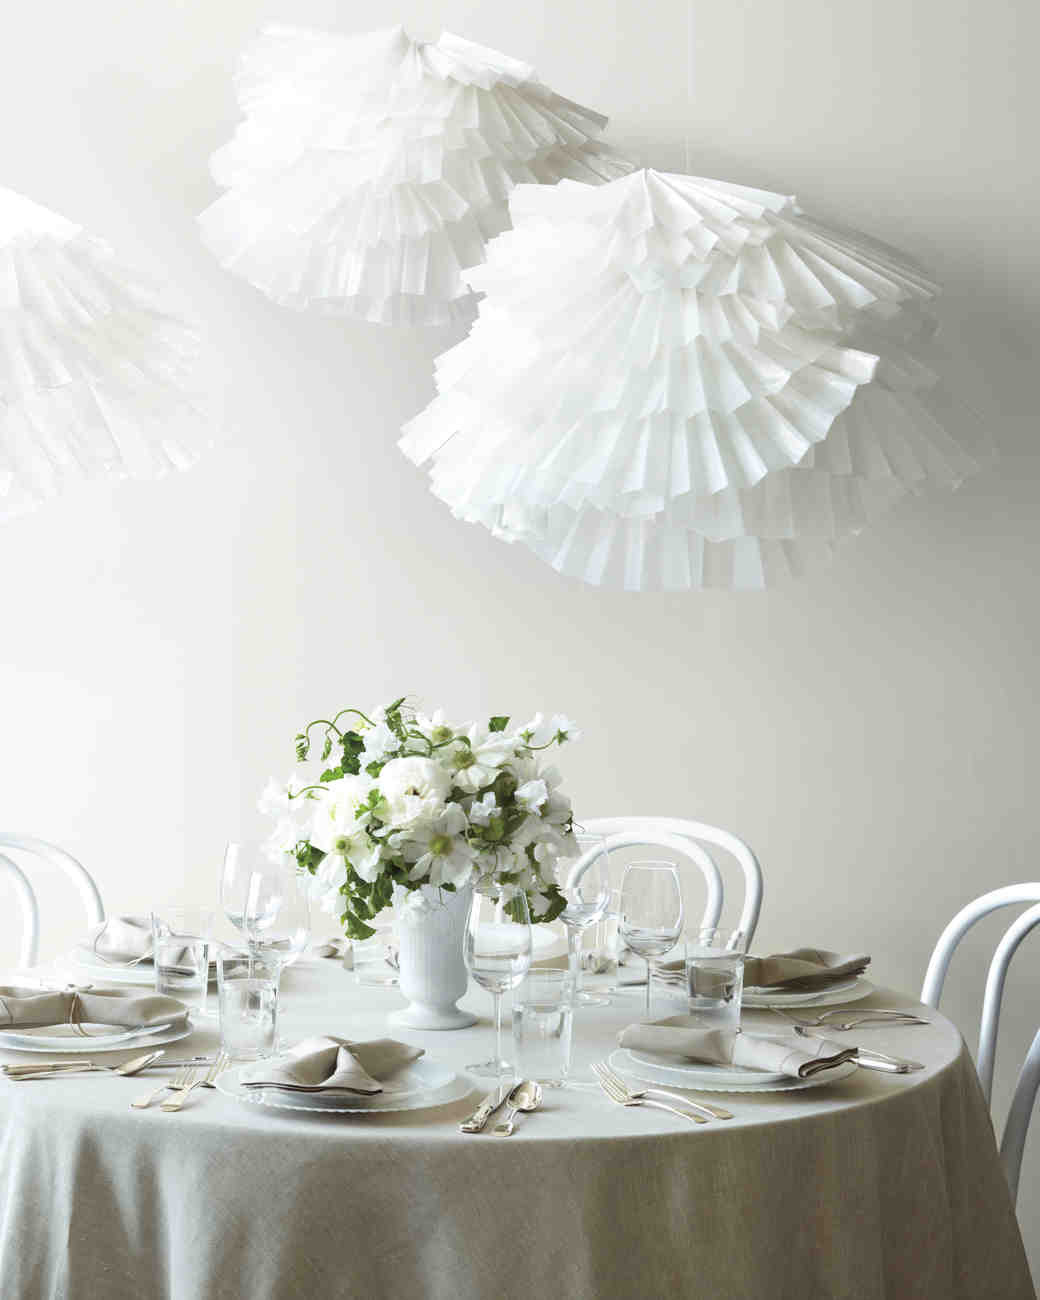 Martha Stewart Wedding Decorations
 Easy to Make Paper Decorations For Your Wedding